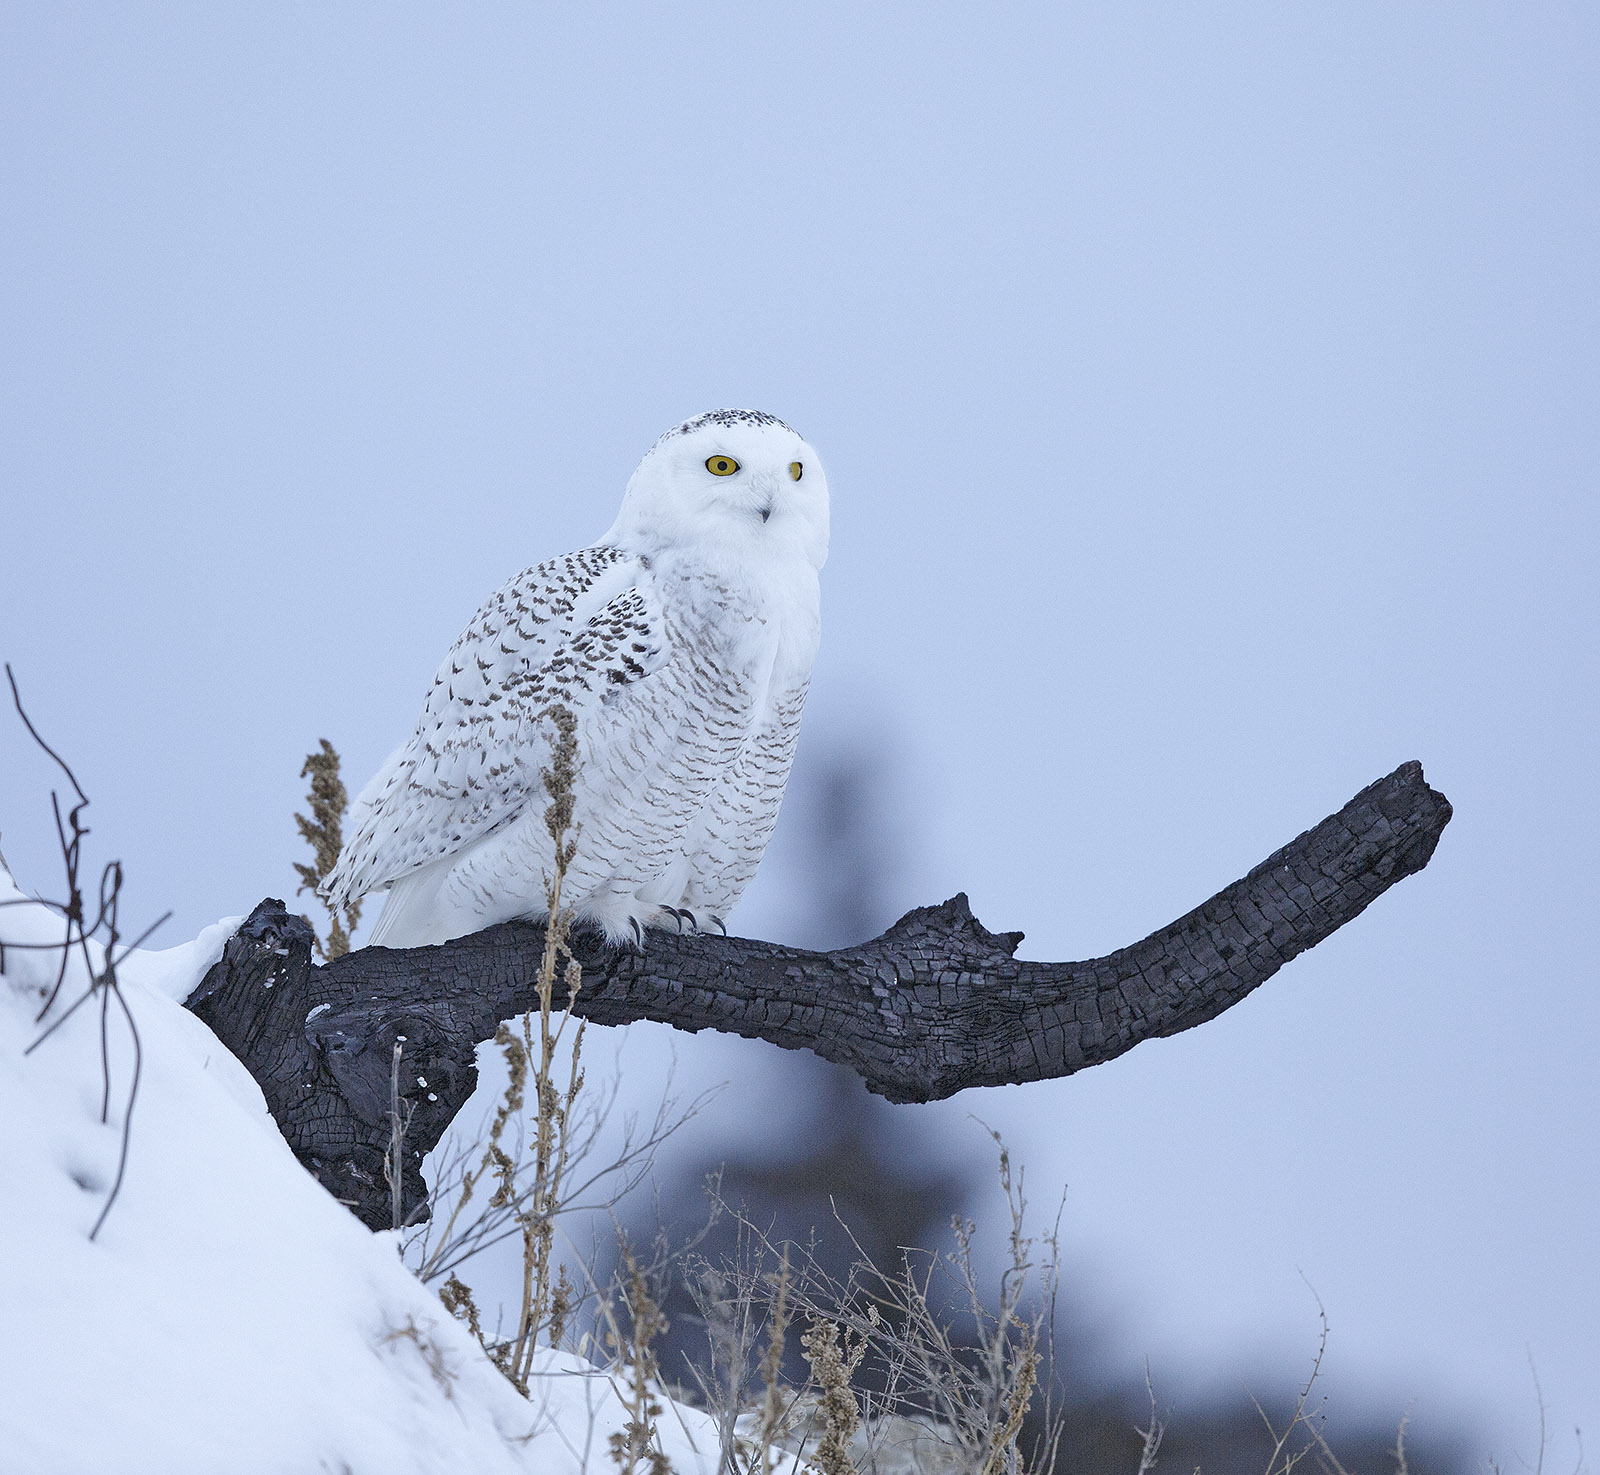 pewit: Snowy Owl and mouse